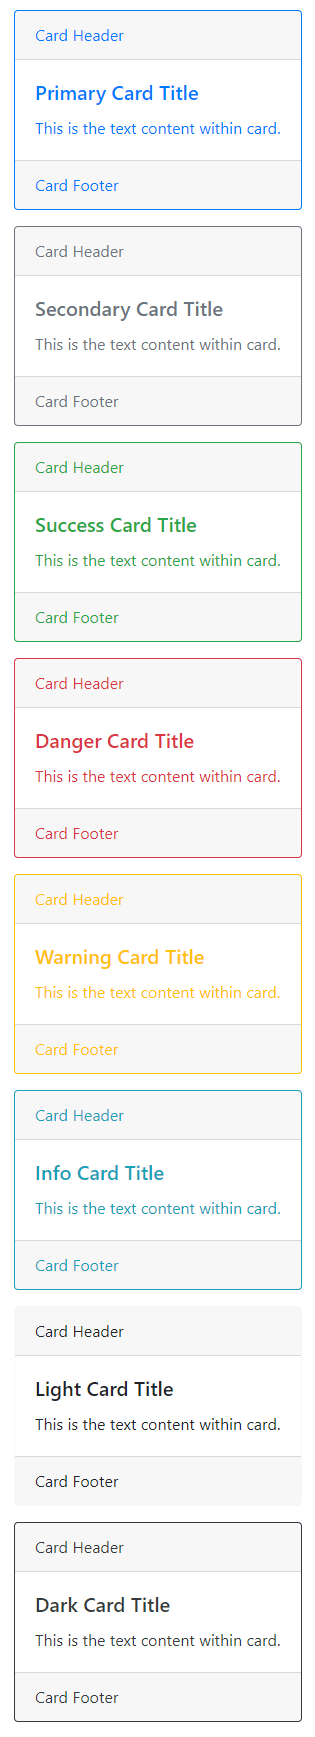 Cards Border Color and Styles in Bootstrap 4